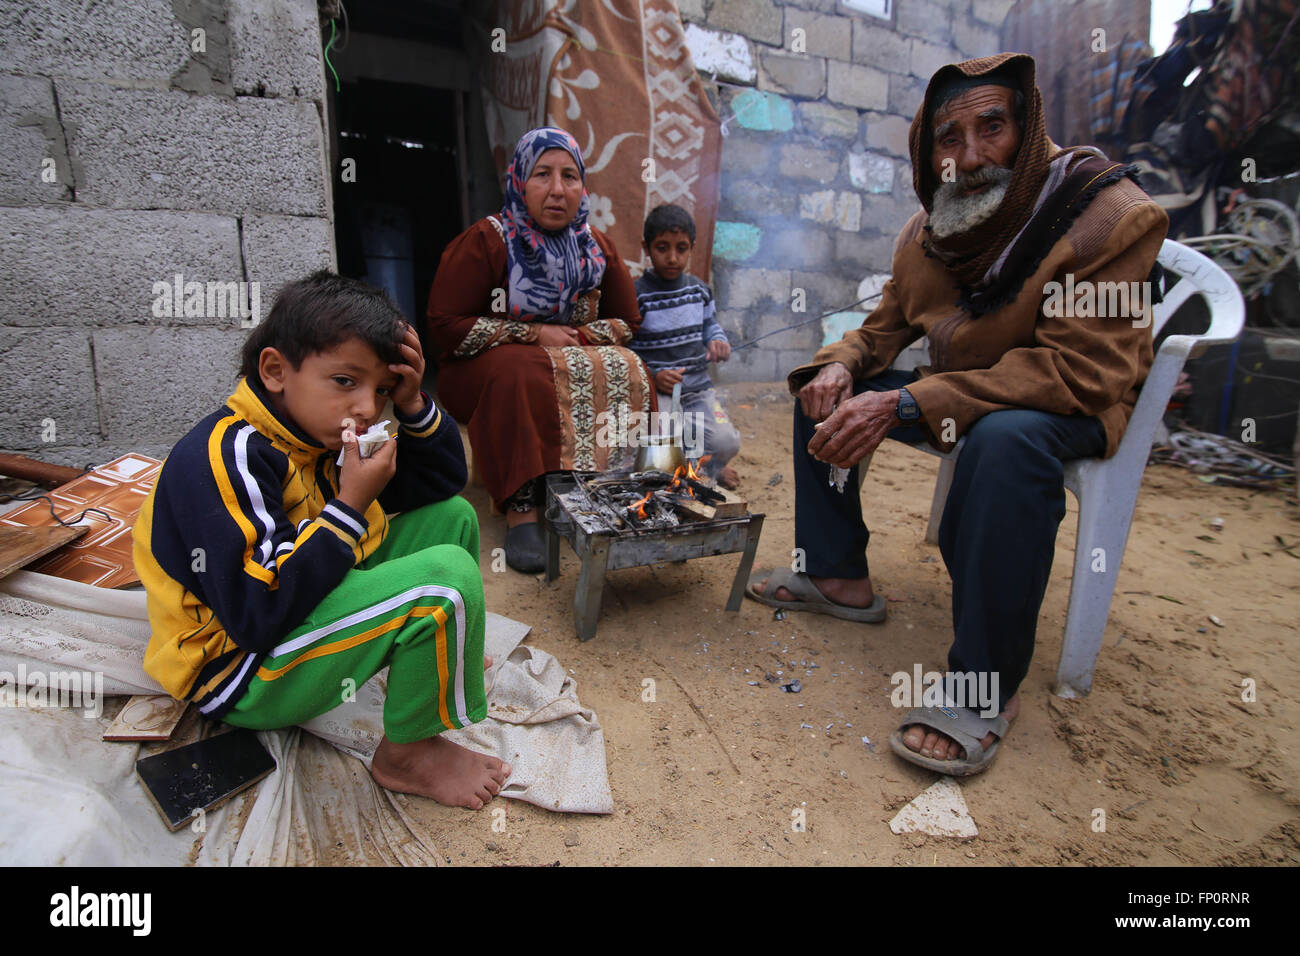 (160317) -- GAZA, March 17, 2016 (Xinhua) -- Palestinian Jihan Moussa Abu Mohsen, 48, sits with her family members near the fire inside their house in the southern Gaza Strip city of Khan Yunis, on March 17, 2016. Jihan, who works from the morning hours till late the day, sells a cart of bricks to stone manufacturers for 4 US dollars per day. Her work is the main source of income for her family which consists of her husband and four children. Jihan and her son Ahmad get up early every morning to collect bricks and stones from anywhere they find them, whether in landfills, streets or roadsides. Stock Photo